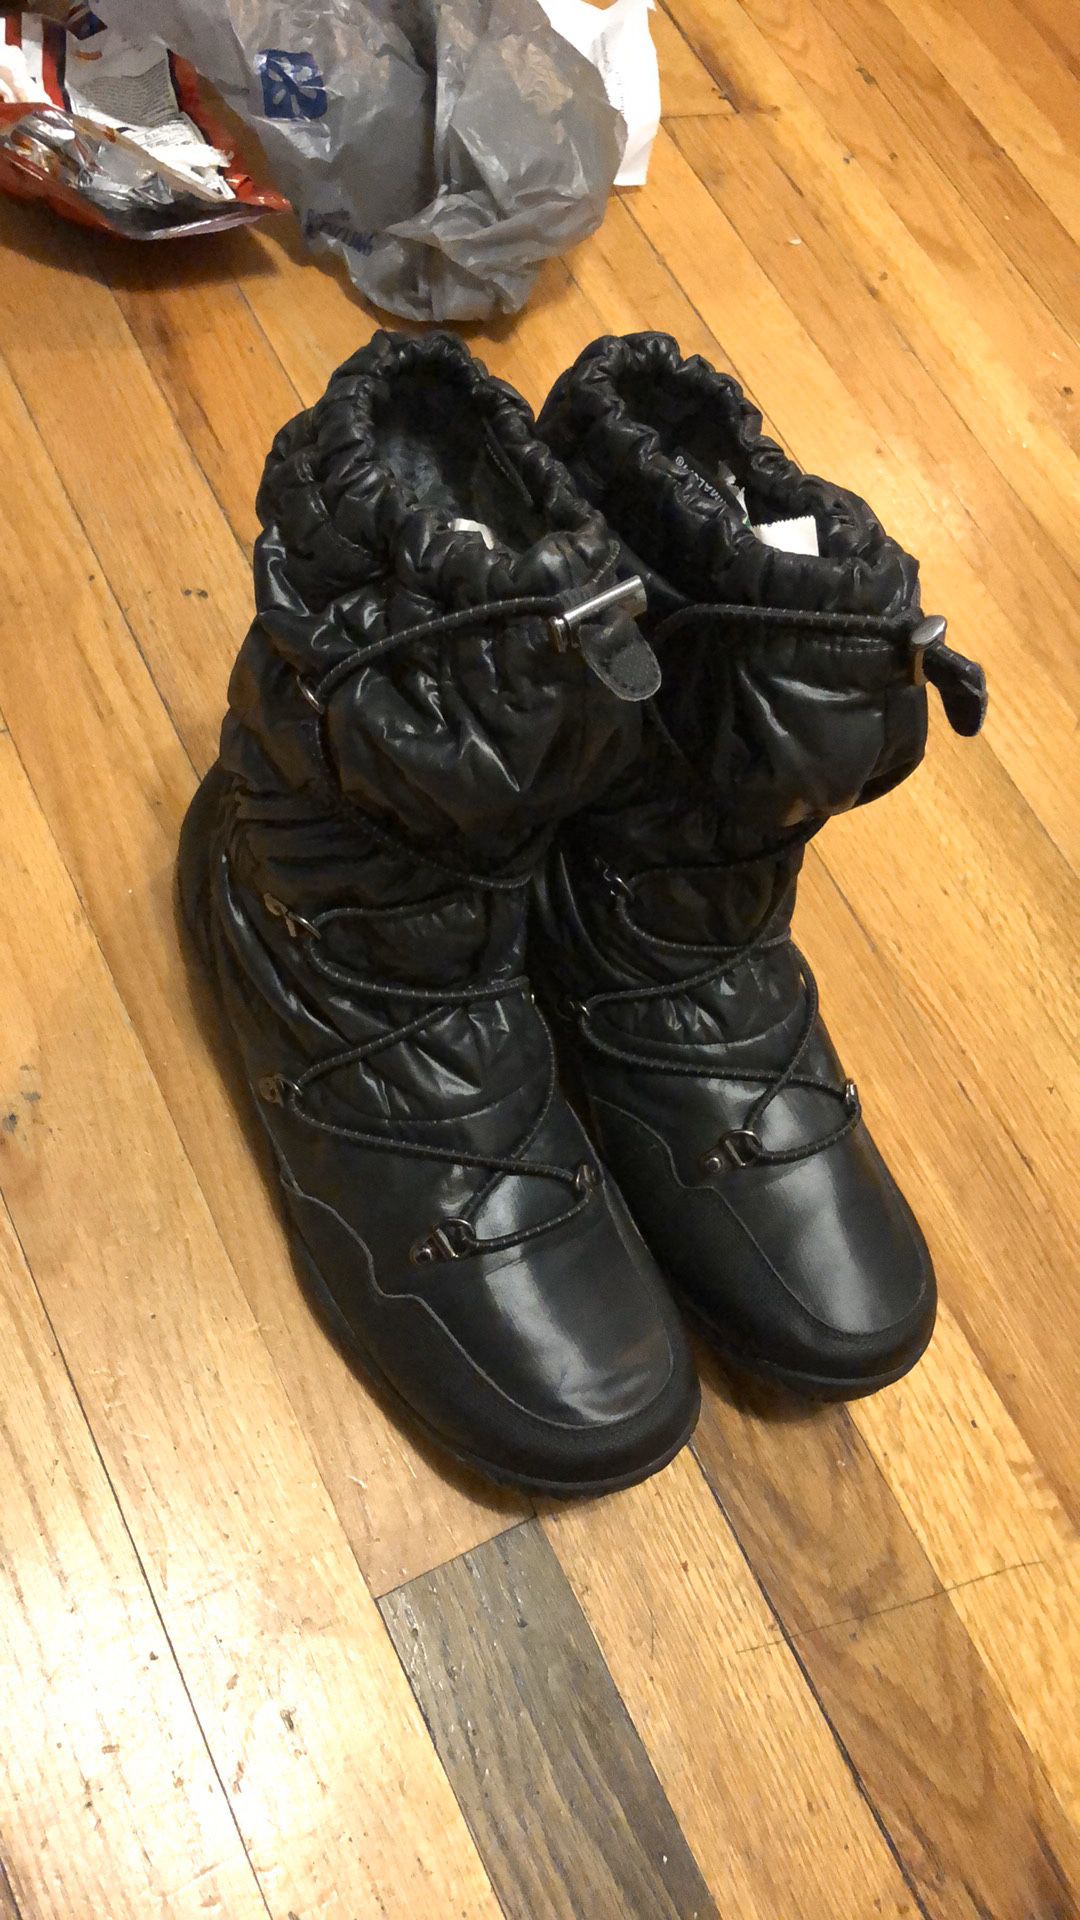 THE NORTH FACE women’s boots like new